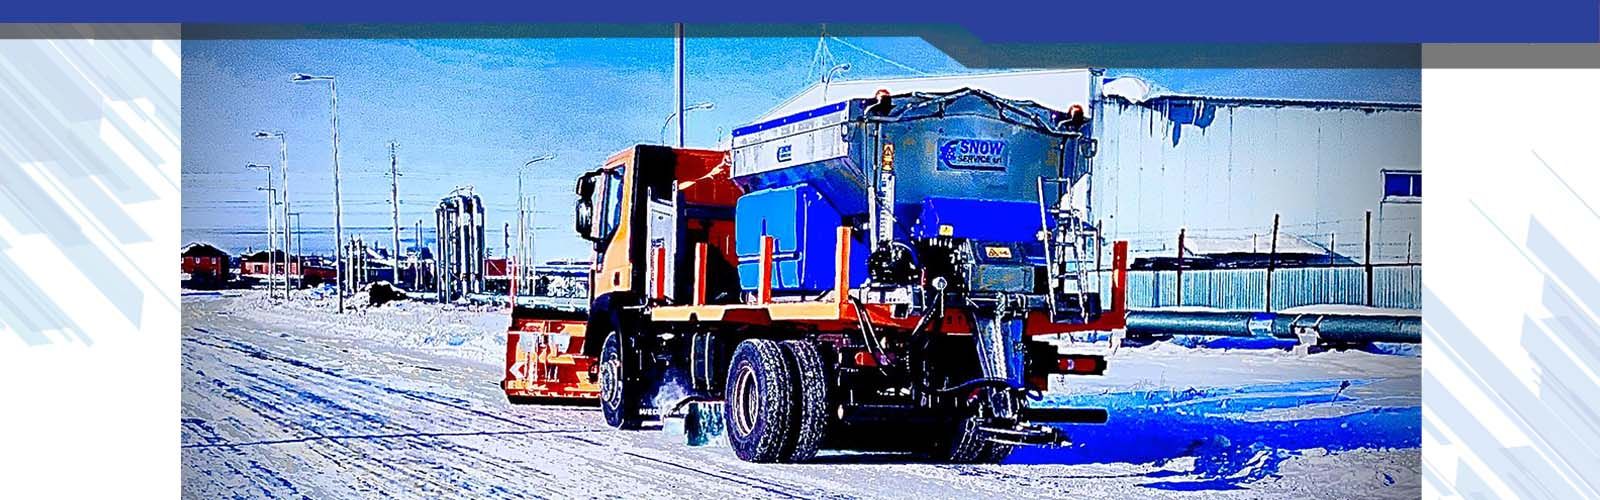 Snow service machines for winter roads and salt spreaders 03